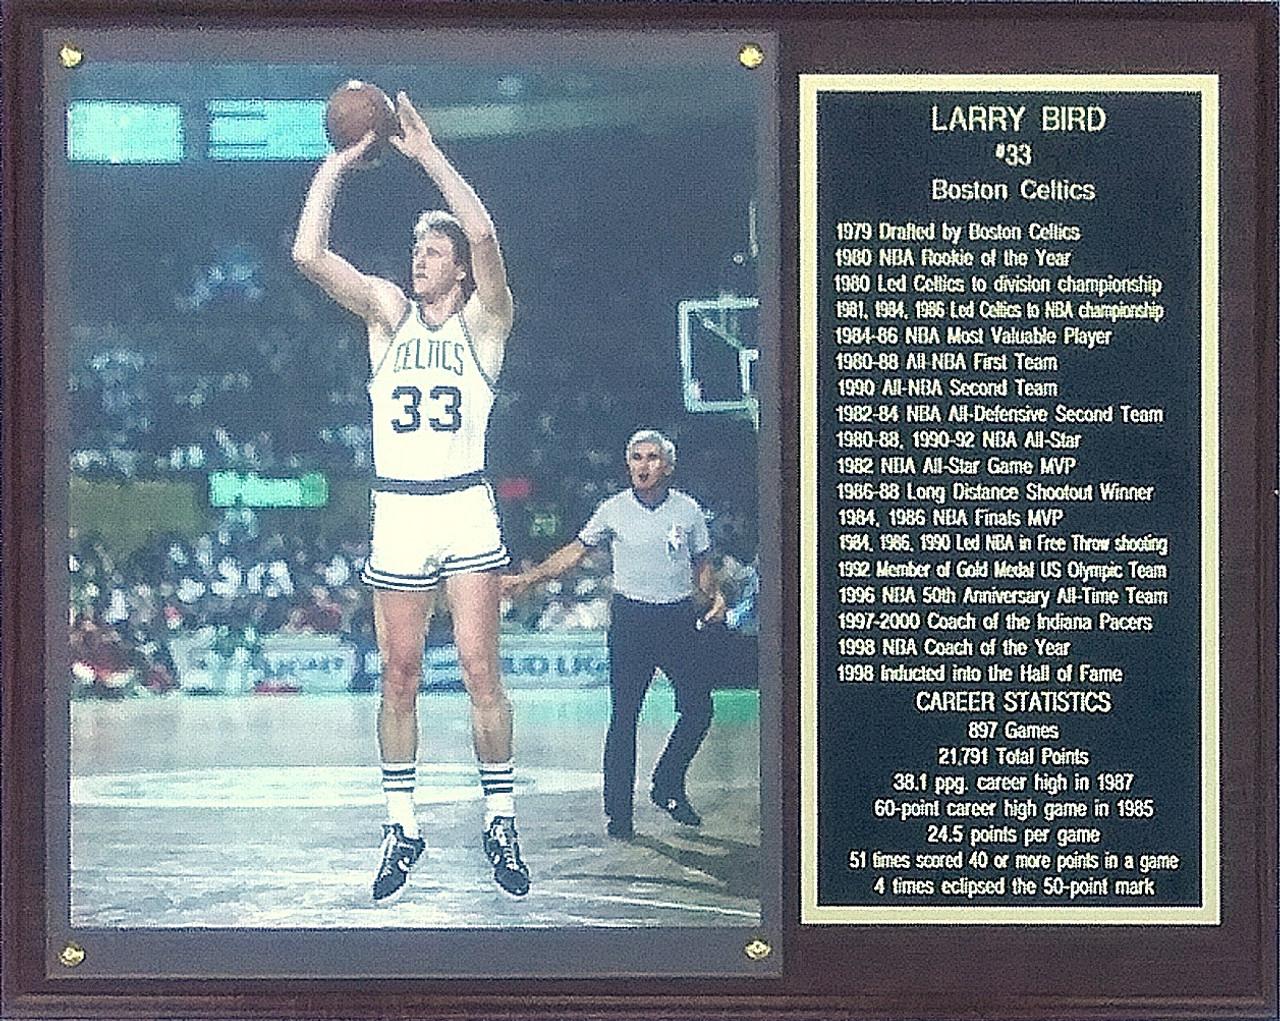 Larry Bird Plaque - All You Need to Know BEFORE You Go (with Photos)